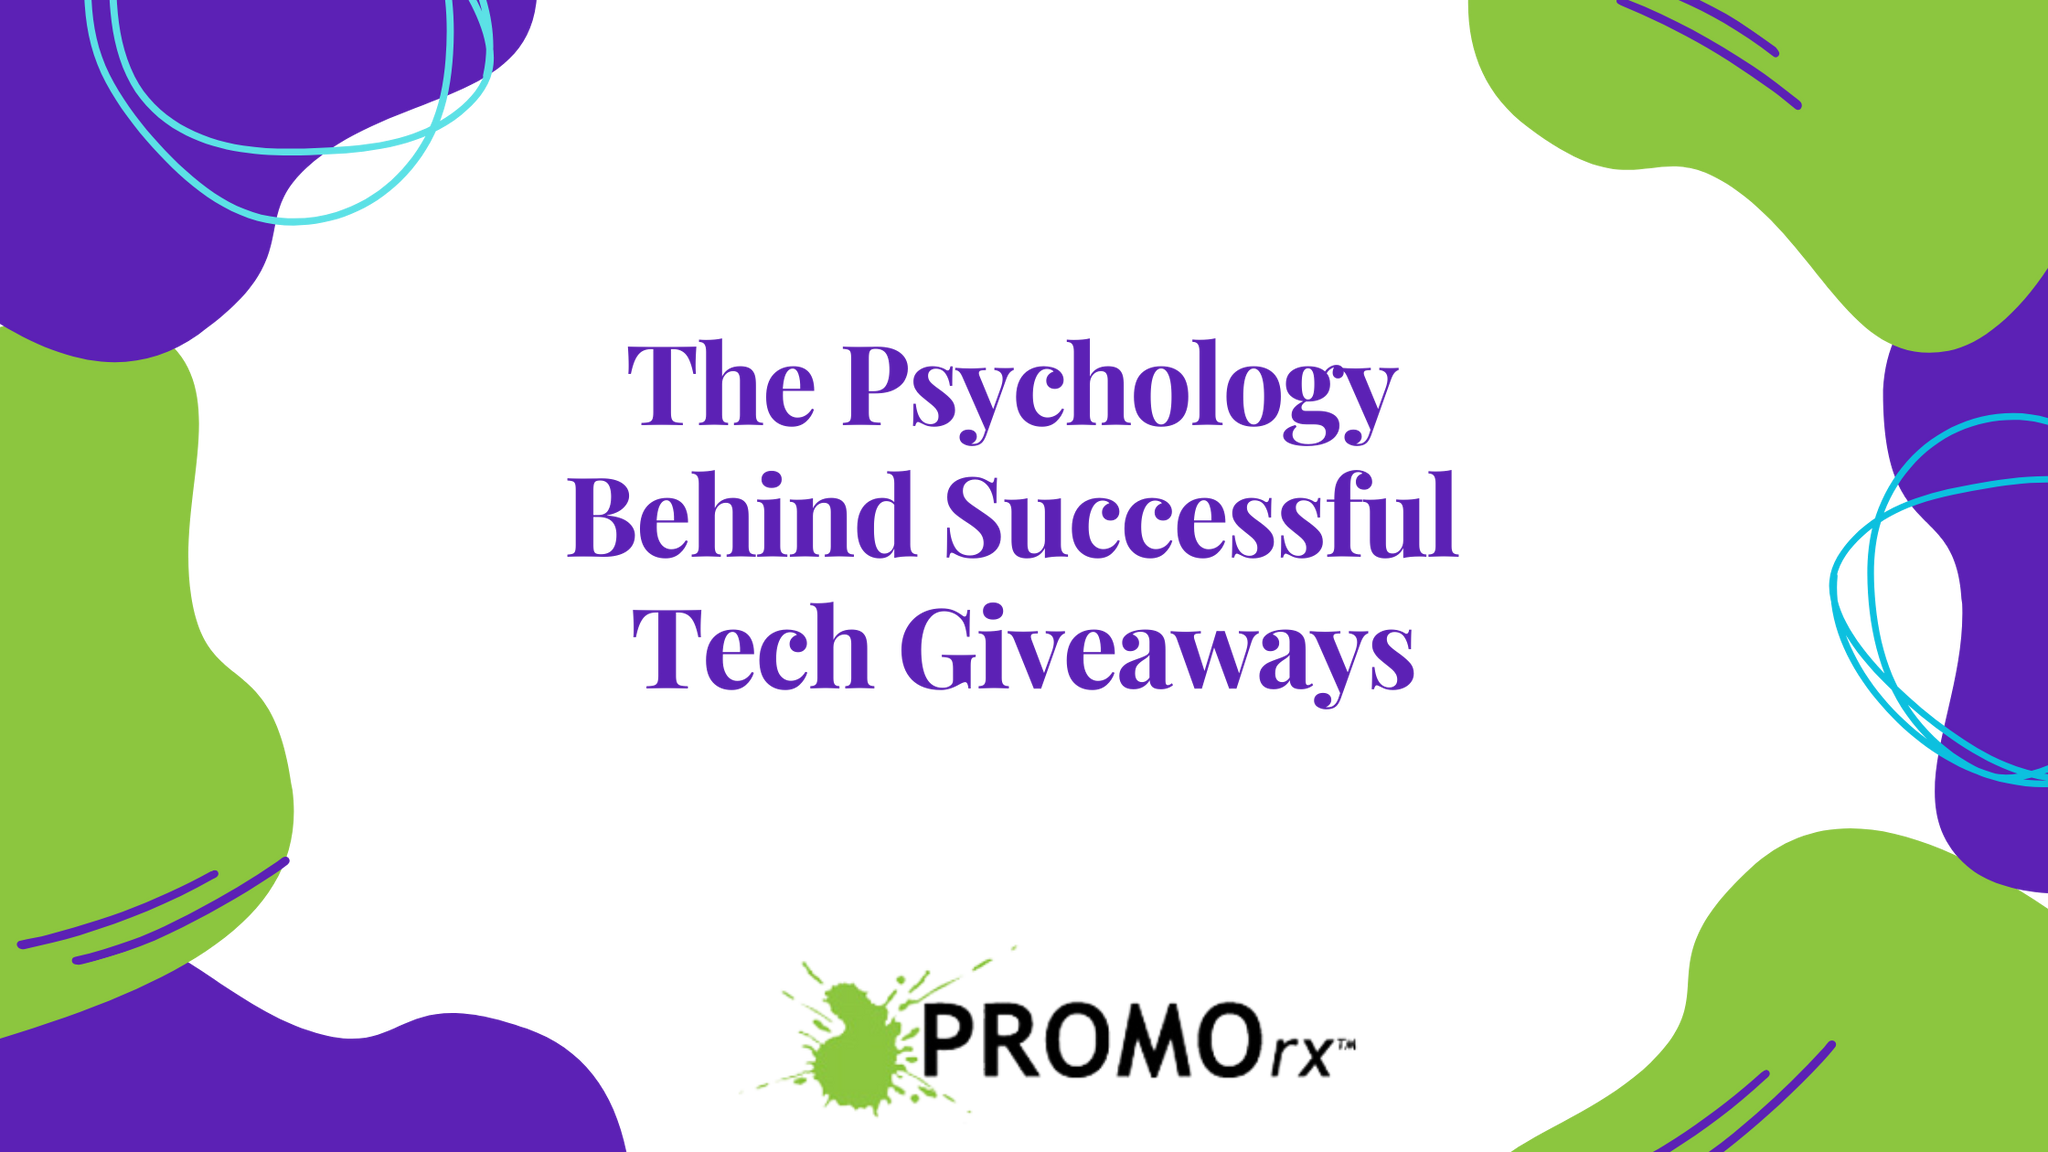 The Psychology Behind Successful Tech Giveaways